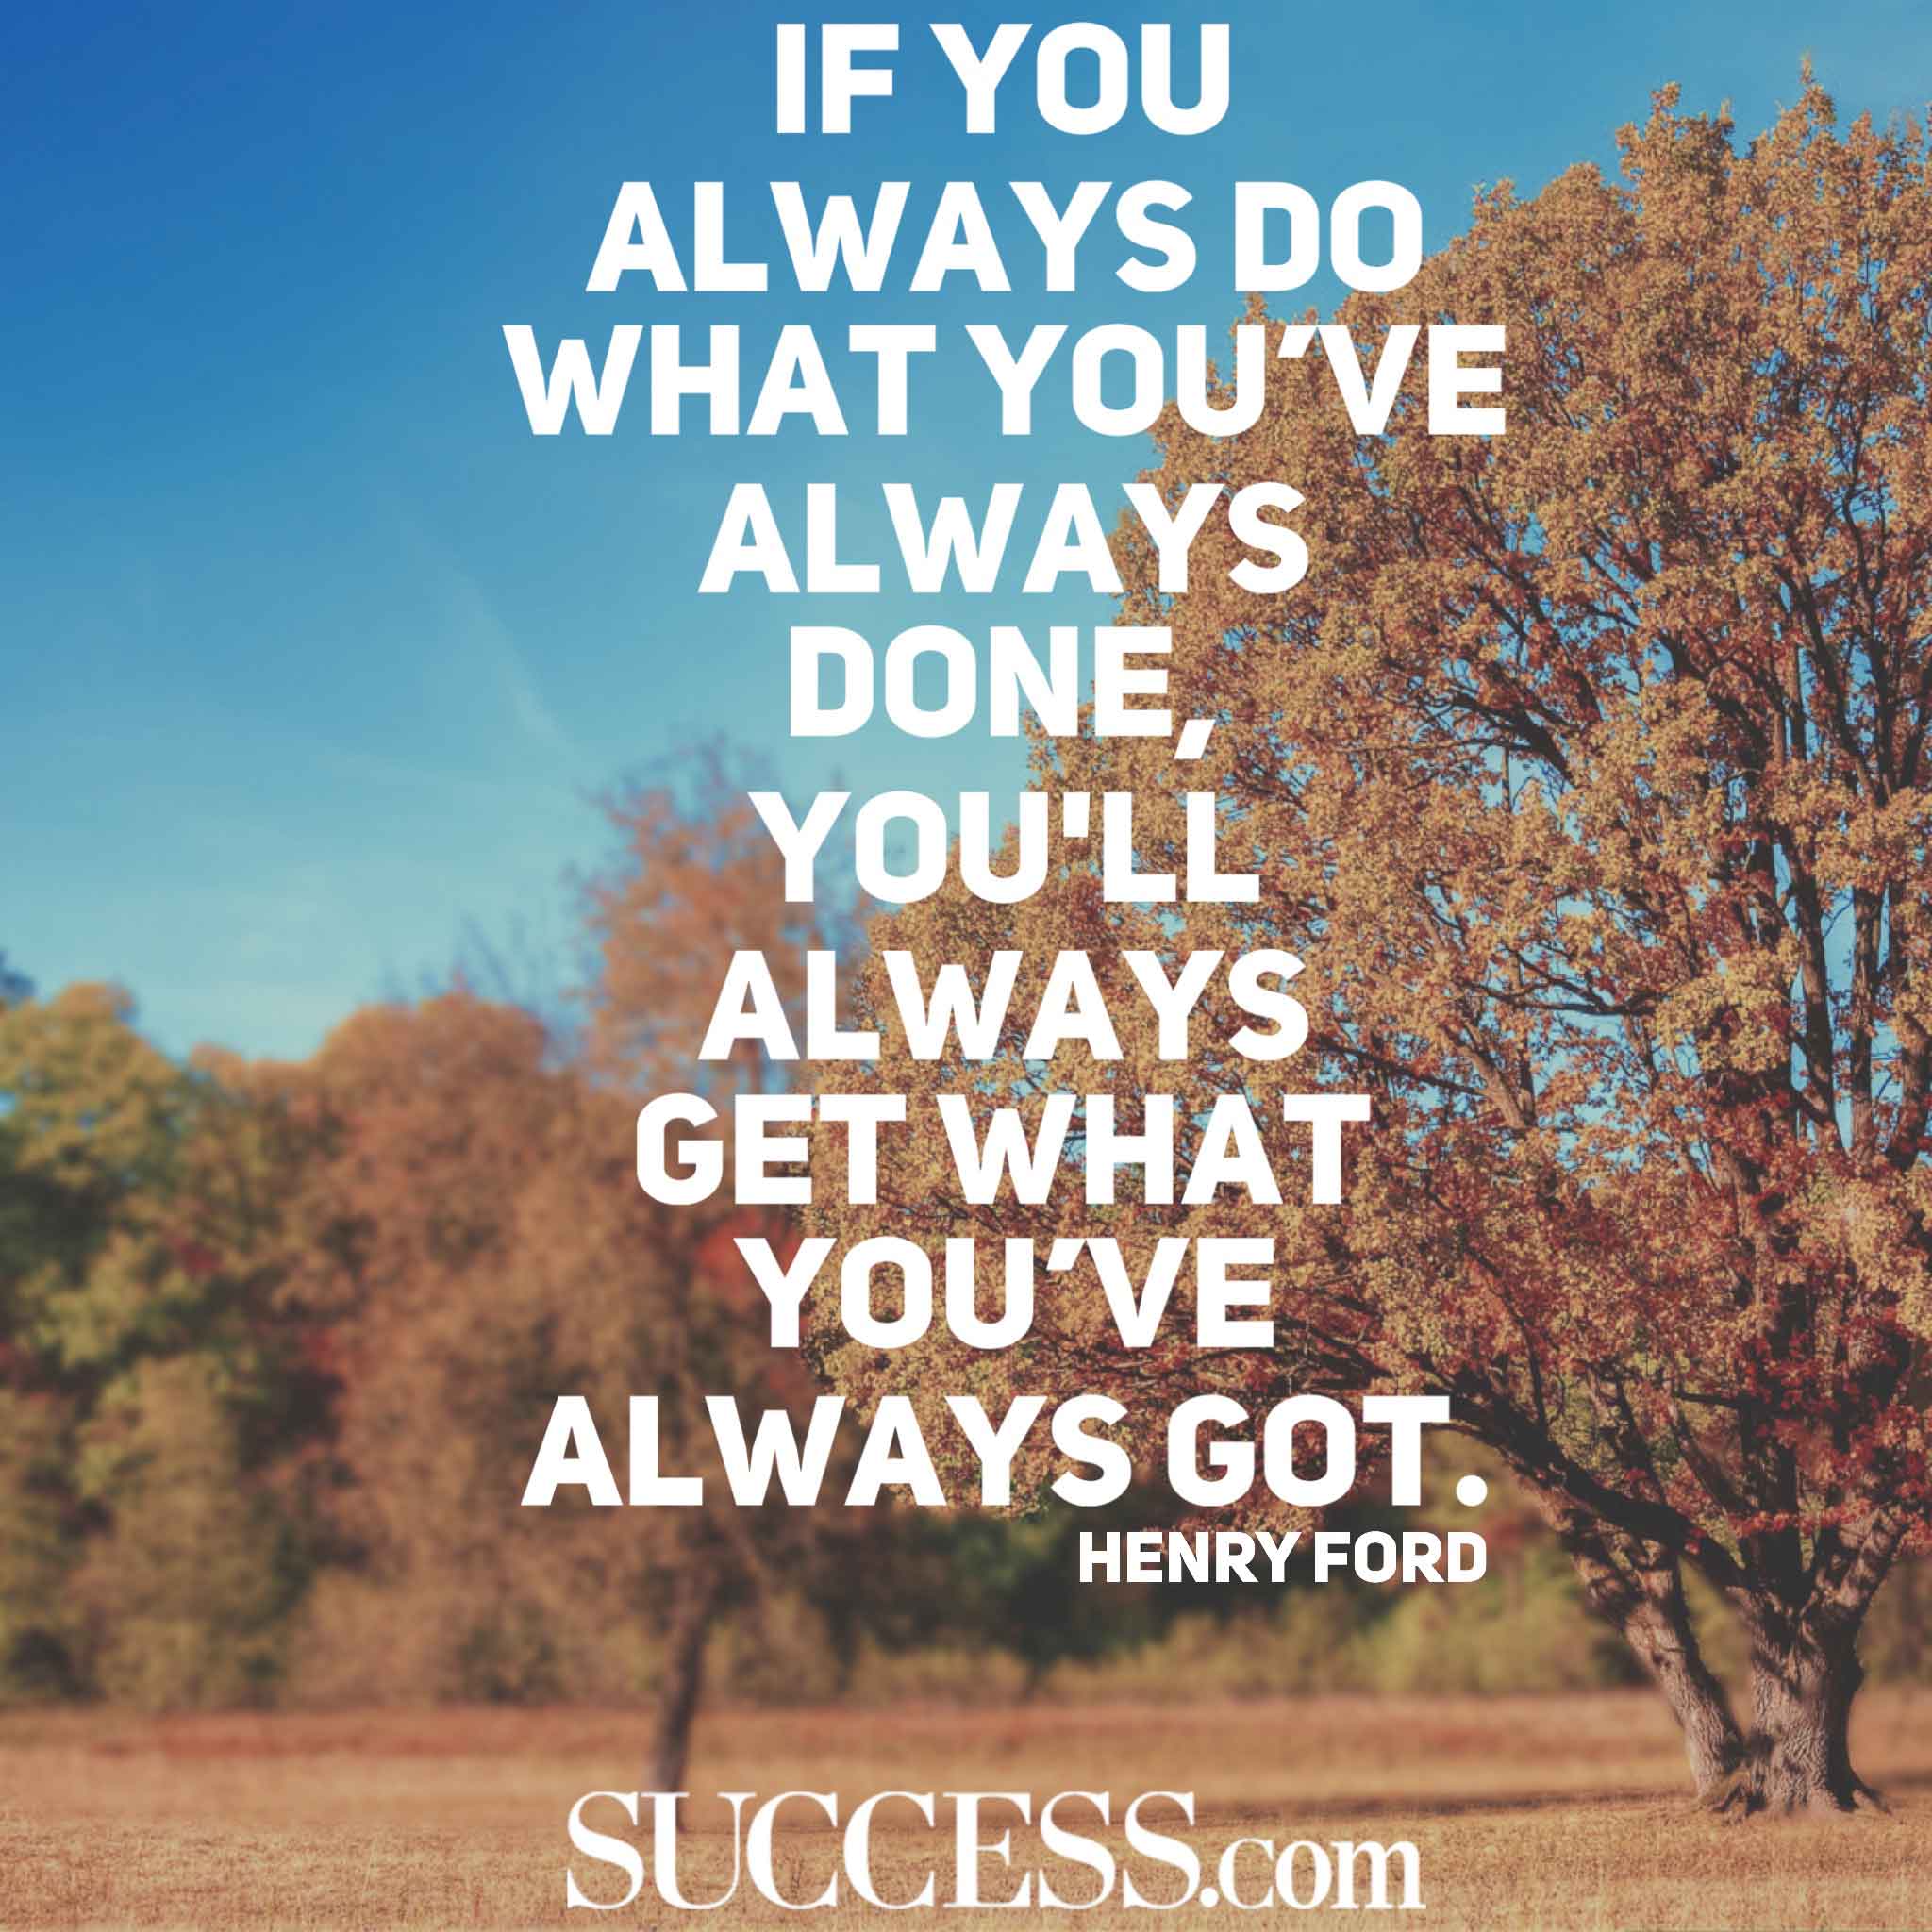 If you always do what you’ve always done, you will always get what you’ve always got. Henry Ford